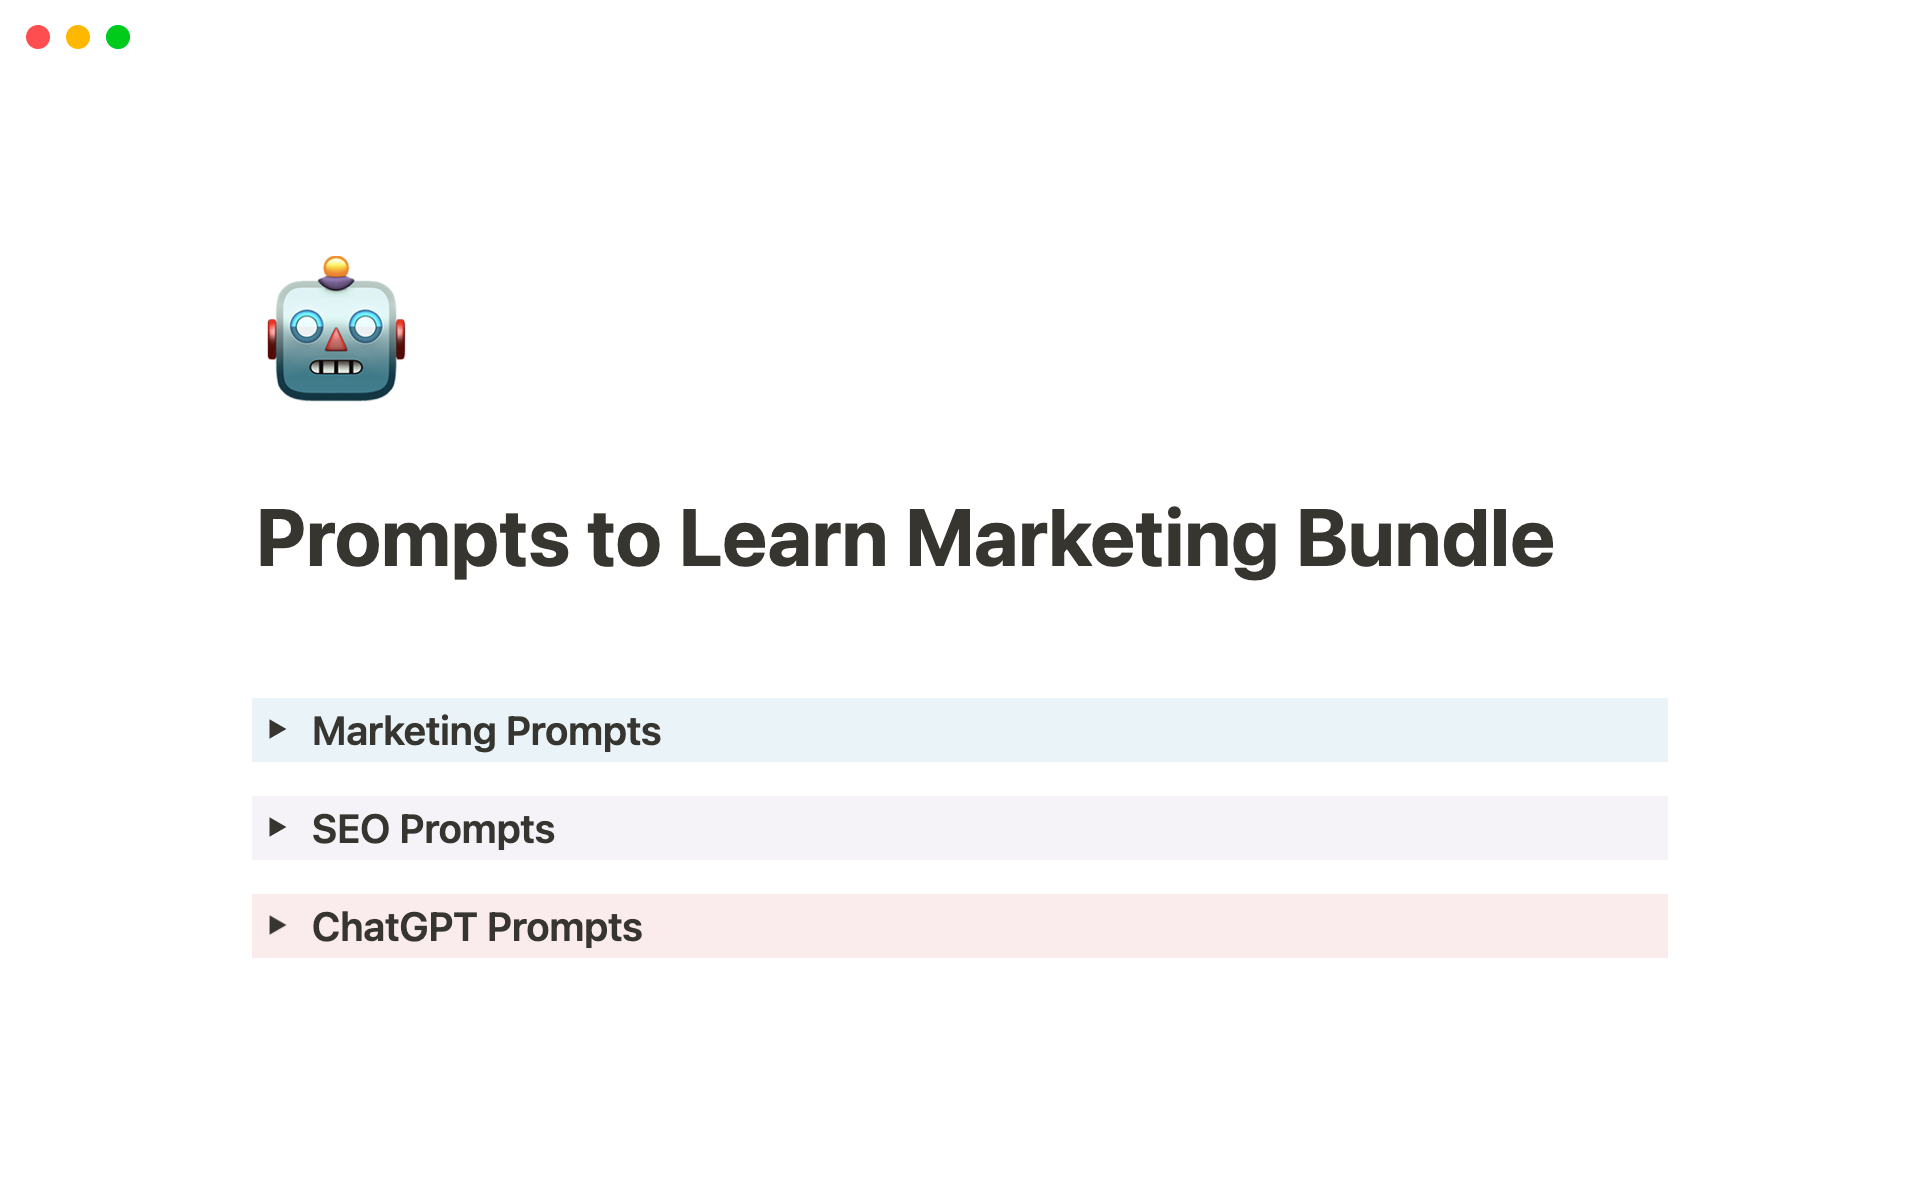 250+ ChatGPT prompts to improve your marketing!